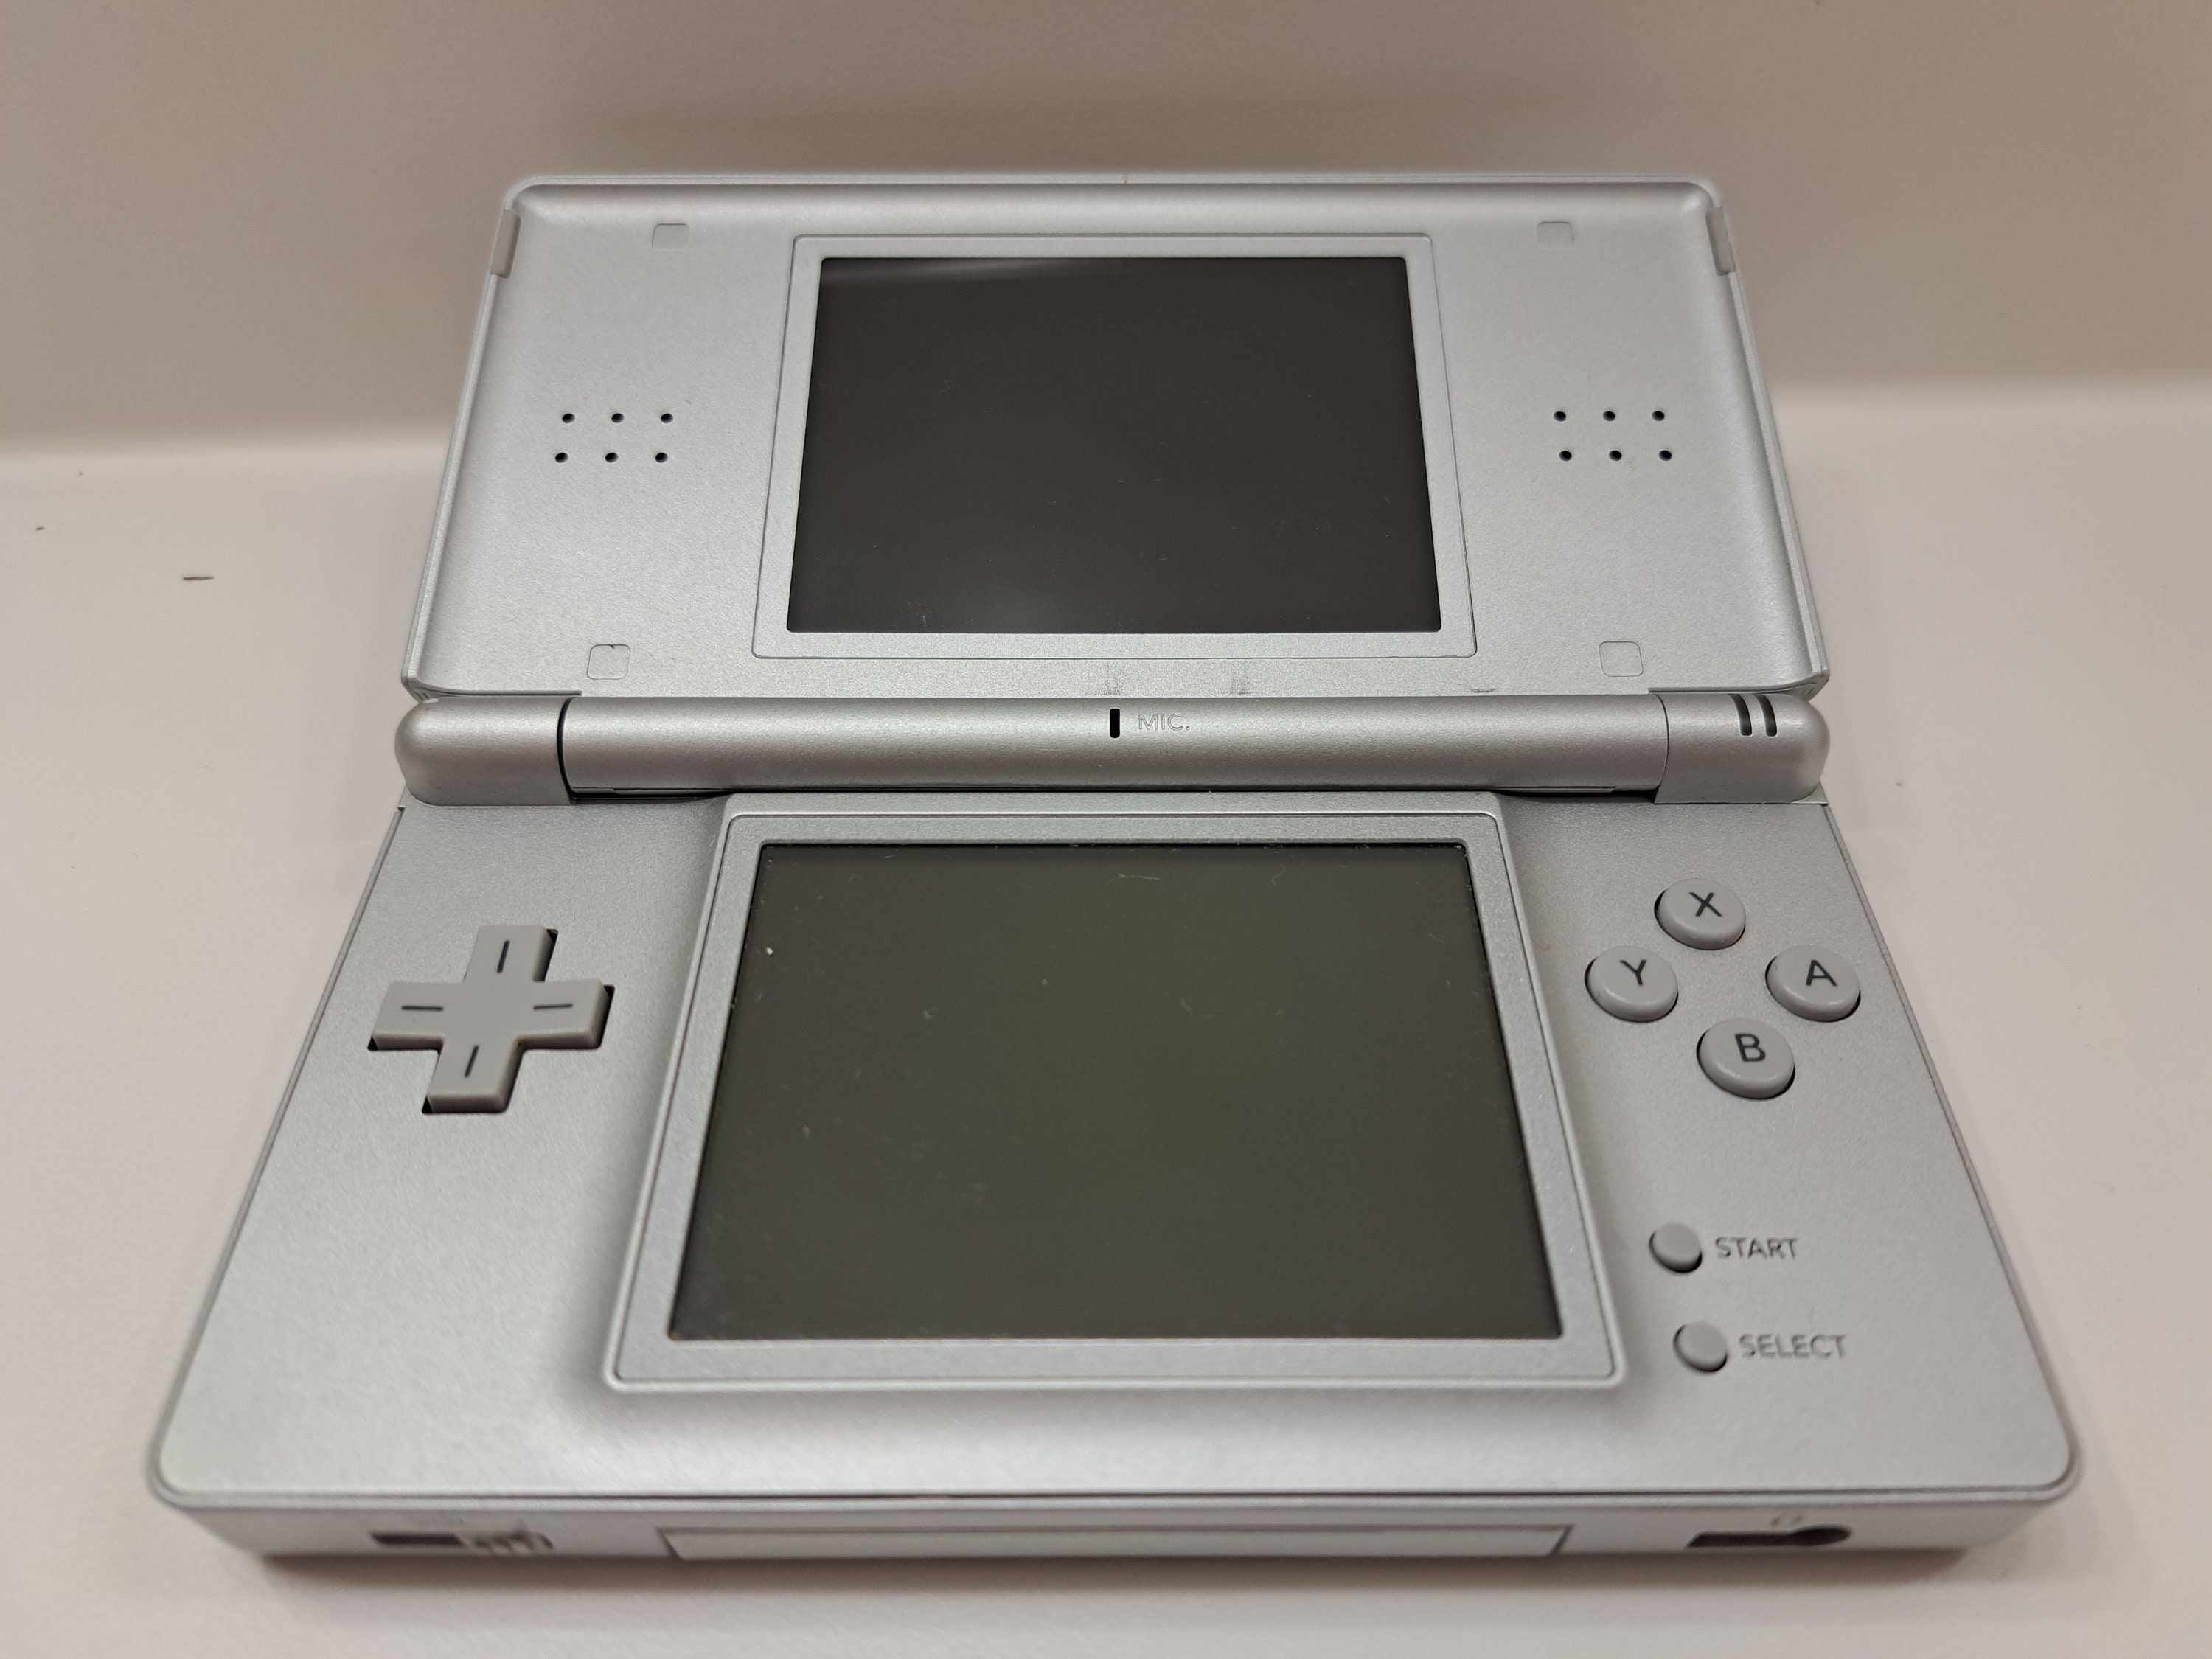 slids Ælte Gade Nintendo DS Lite Console With Charger Metallic Silver Region - Etsy